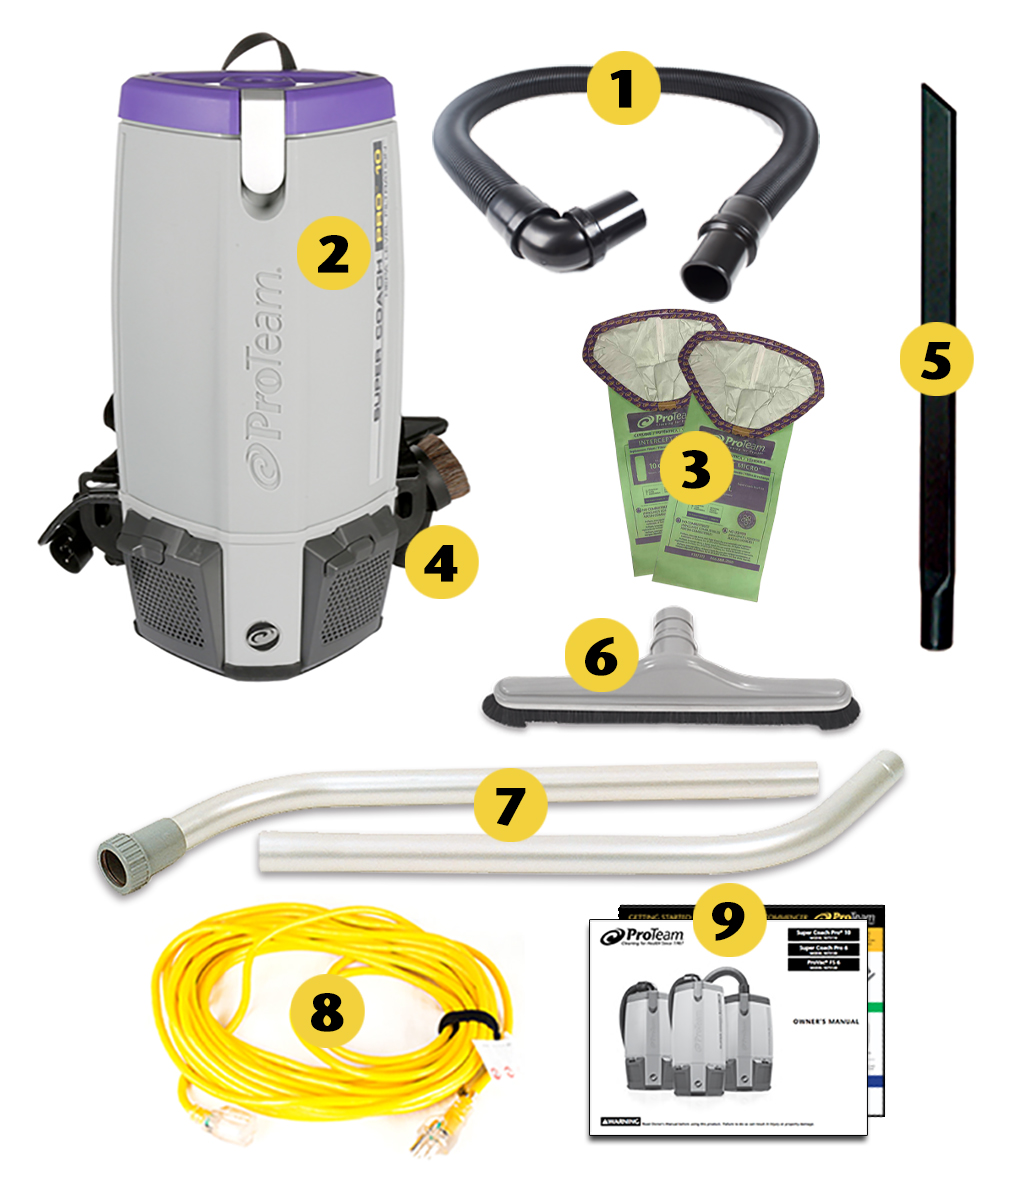 Image of what is included in the box of ProTeam Super Coach Pro 10, 10 quart backpack vacuum